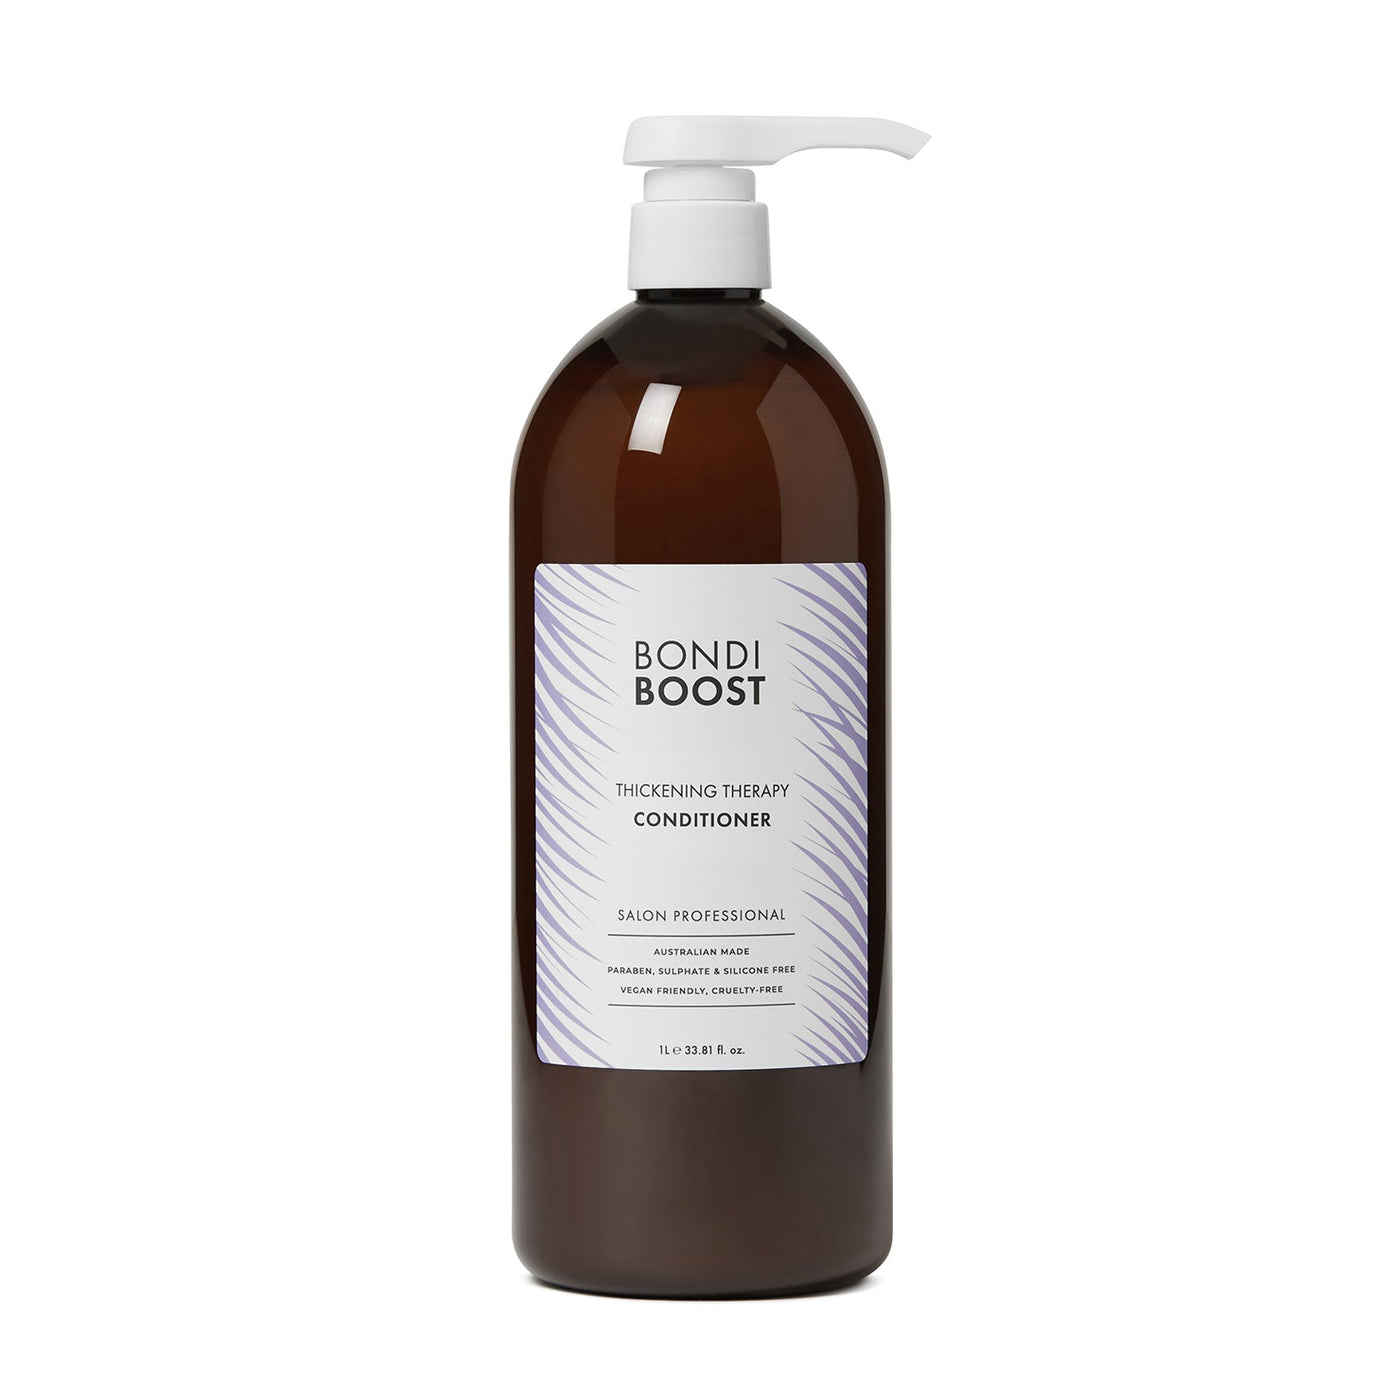 BondiBoost Thickening Therapy Conditioner 1 Litre